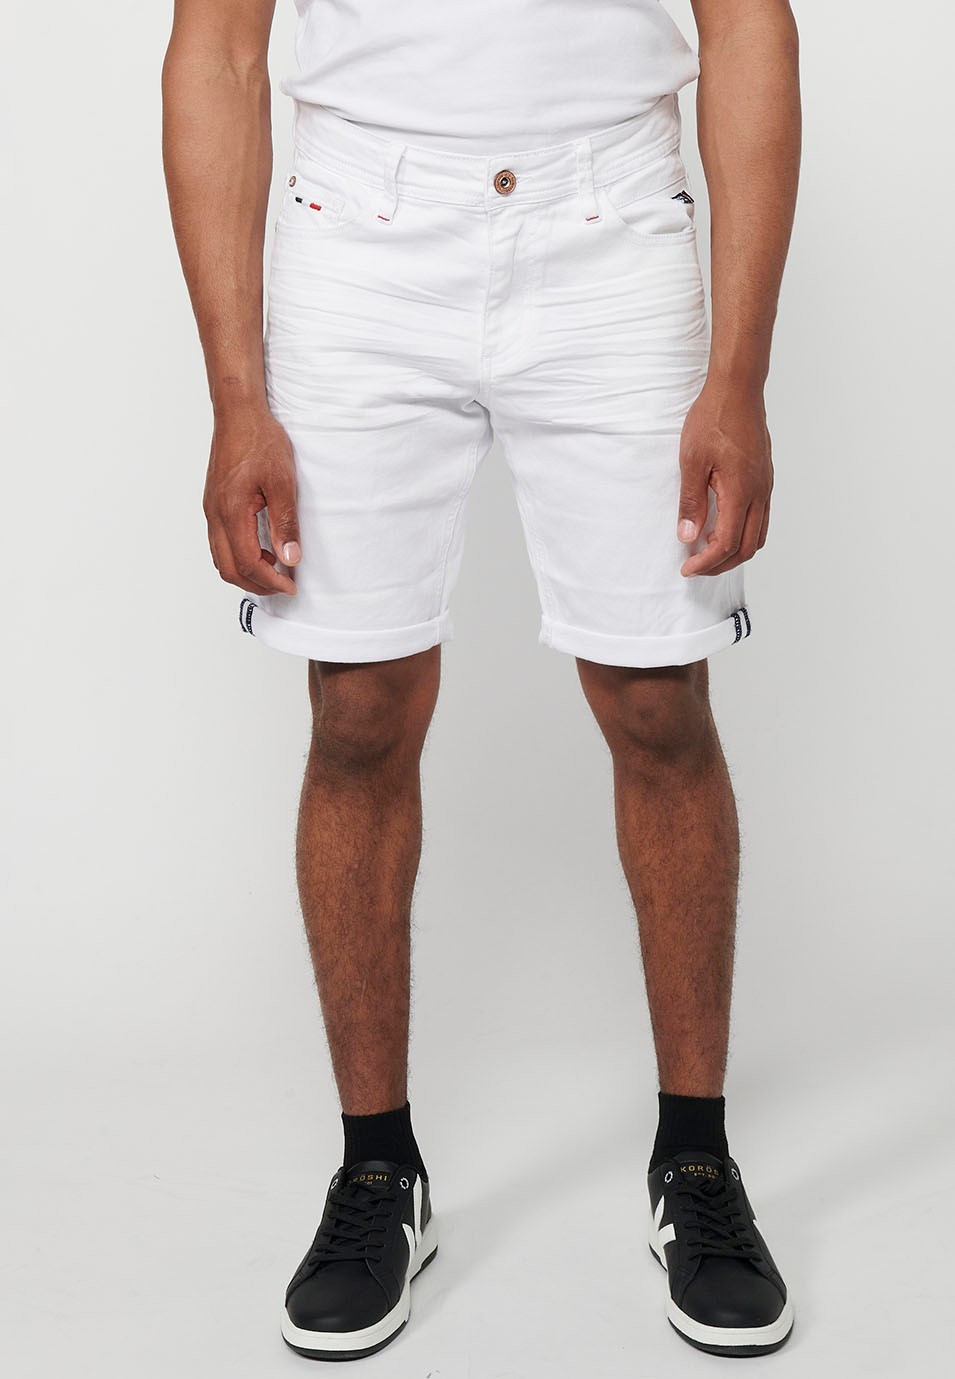 Denim Bermuda shorts with turn-up finish and front closure with zipper and button in White for Men 2